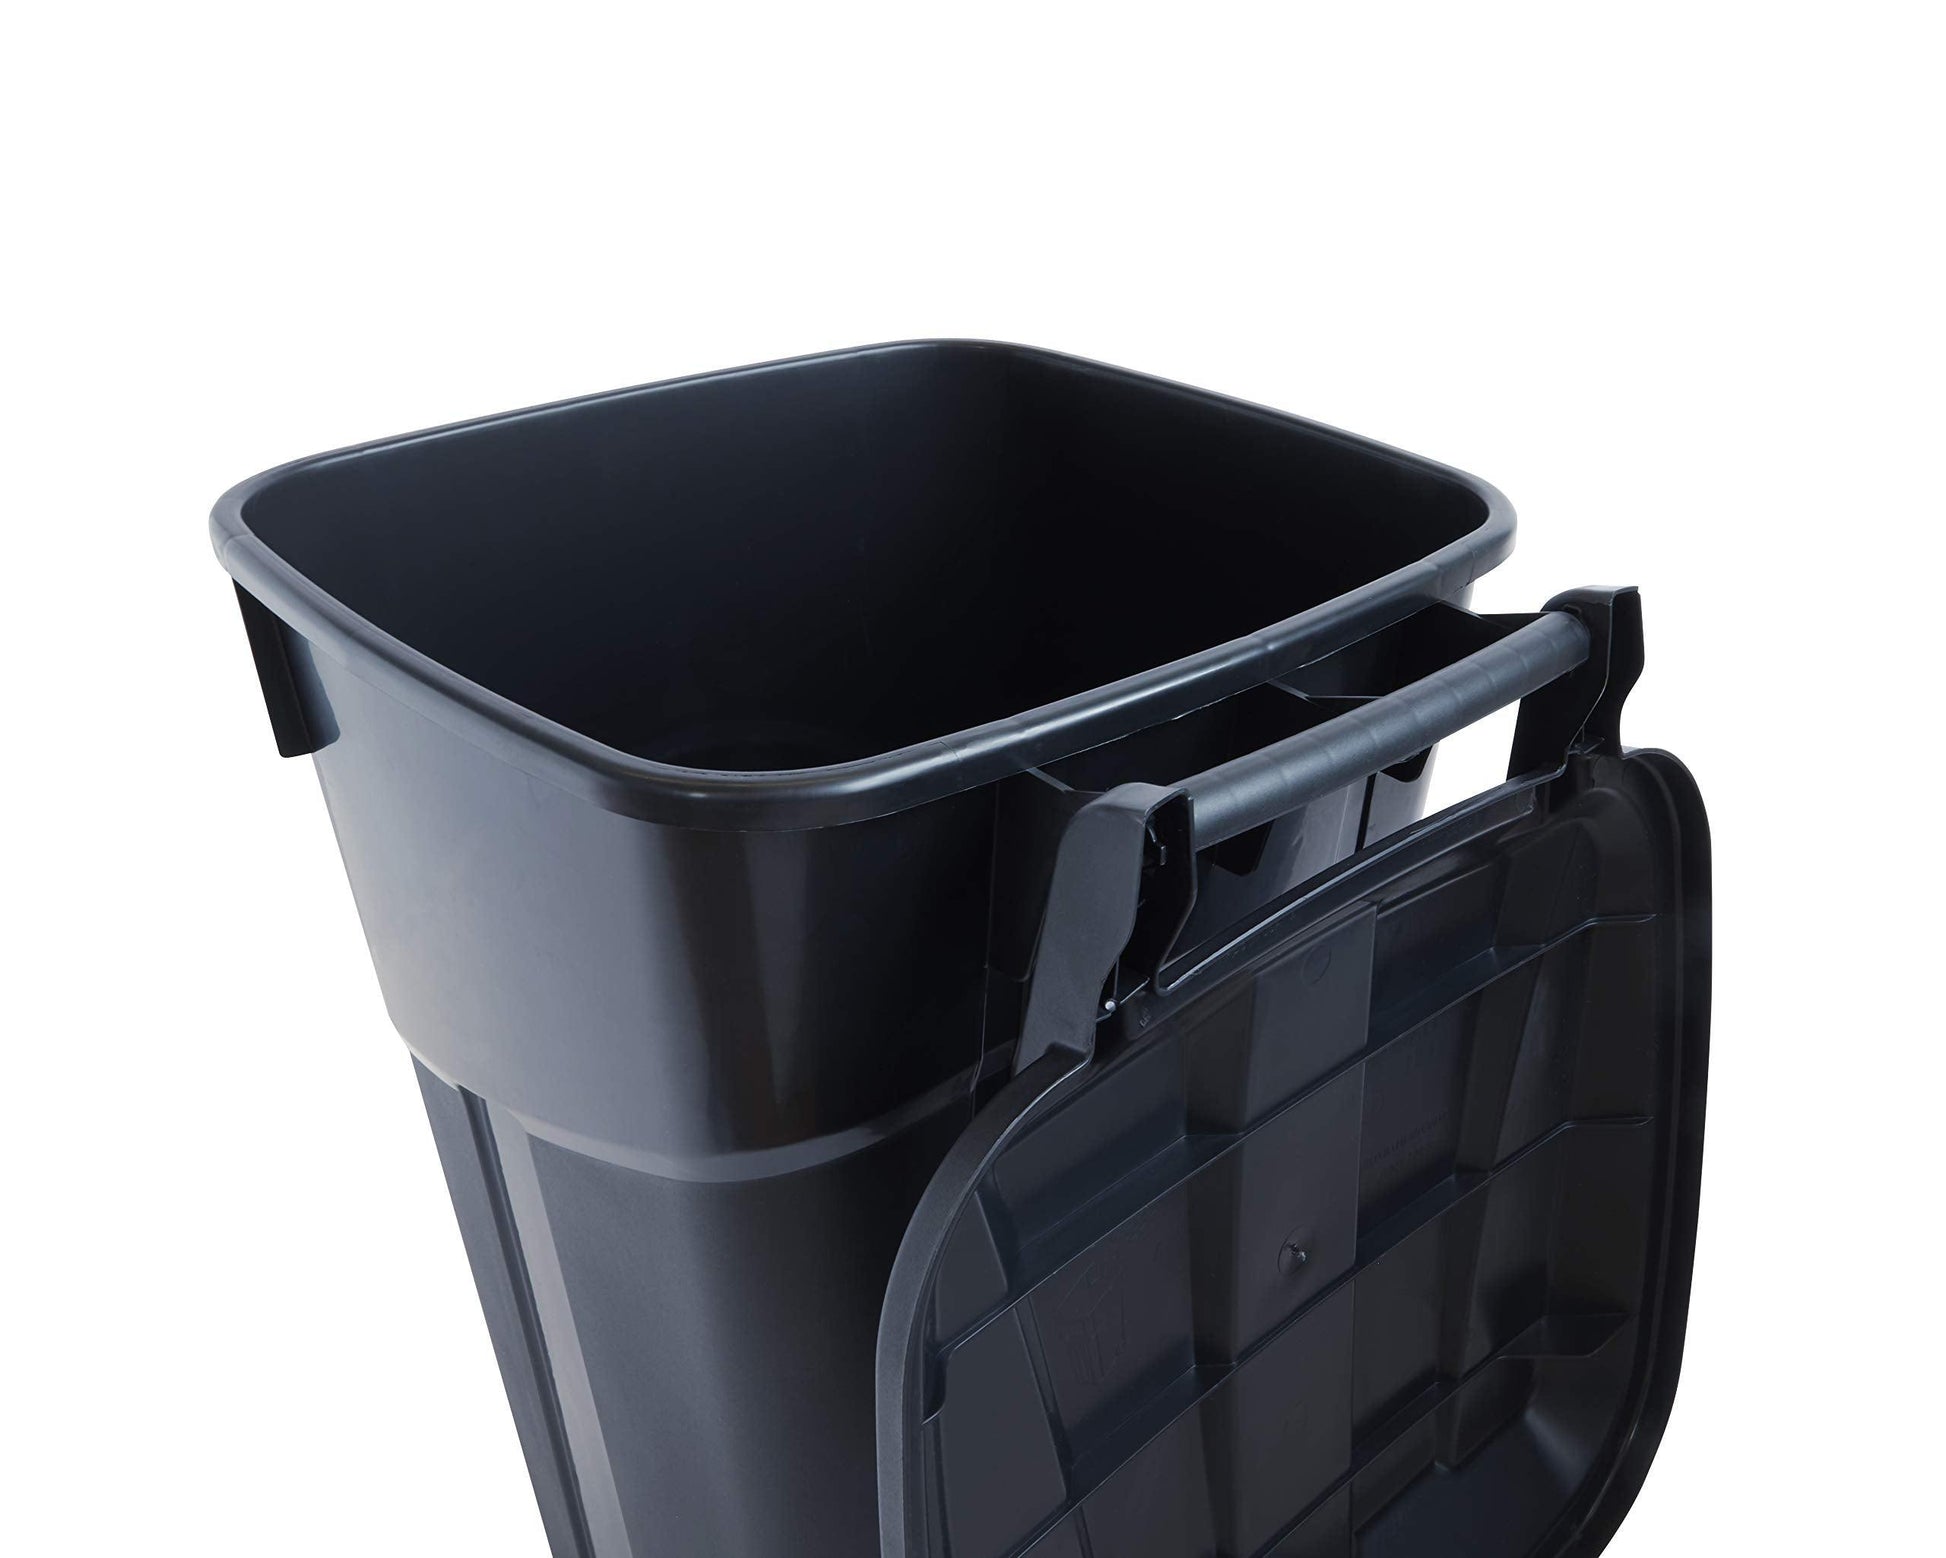 United Solutions 32 Gallon Outdoor Waste Garbage Bin with Attached Lid, Heavy-Duty Handles, Snap Lock , Wheeled Trashcan, Black - CookCave